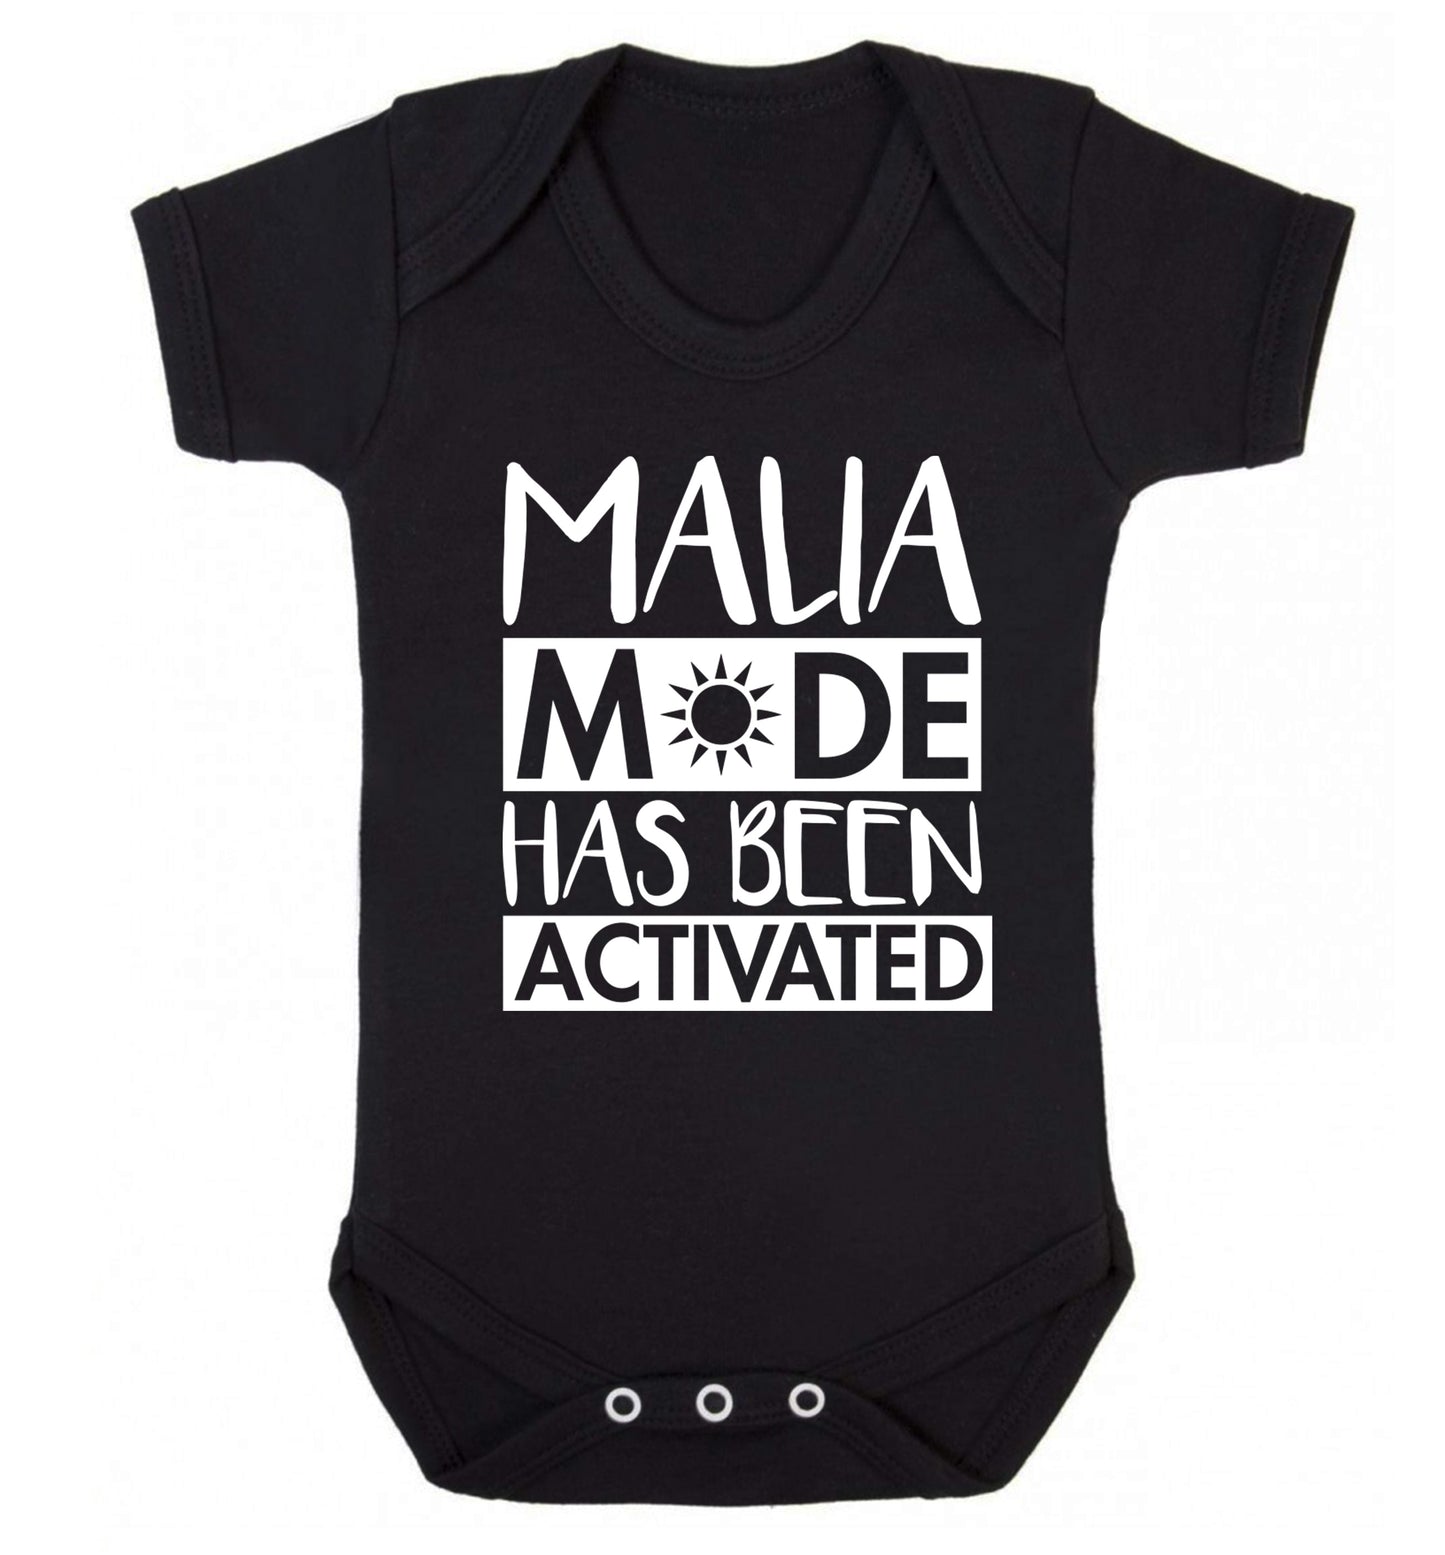 Malia mode has been activated Baby Vest black 18-24 months